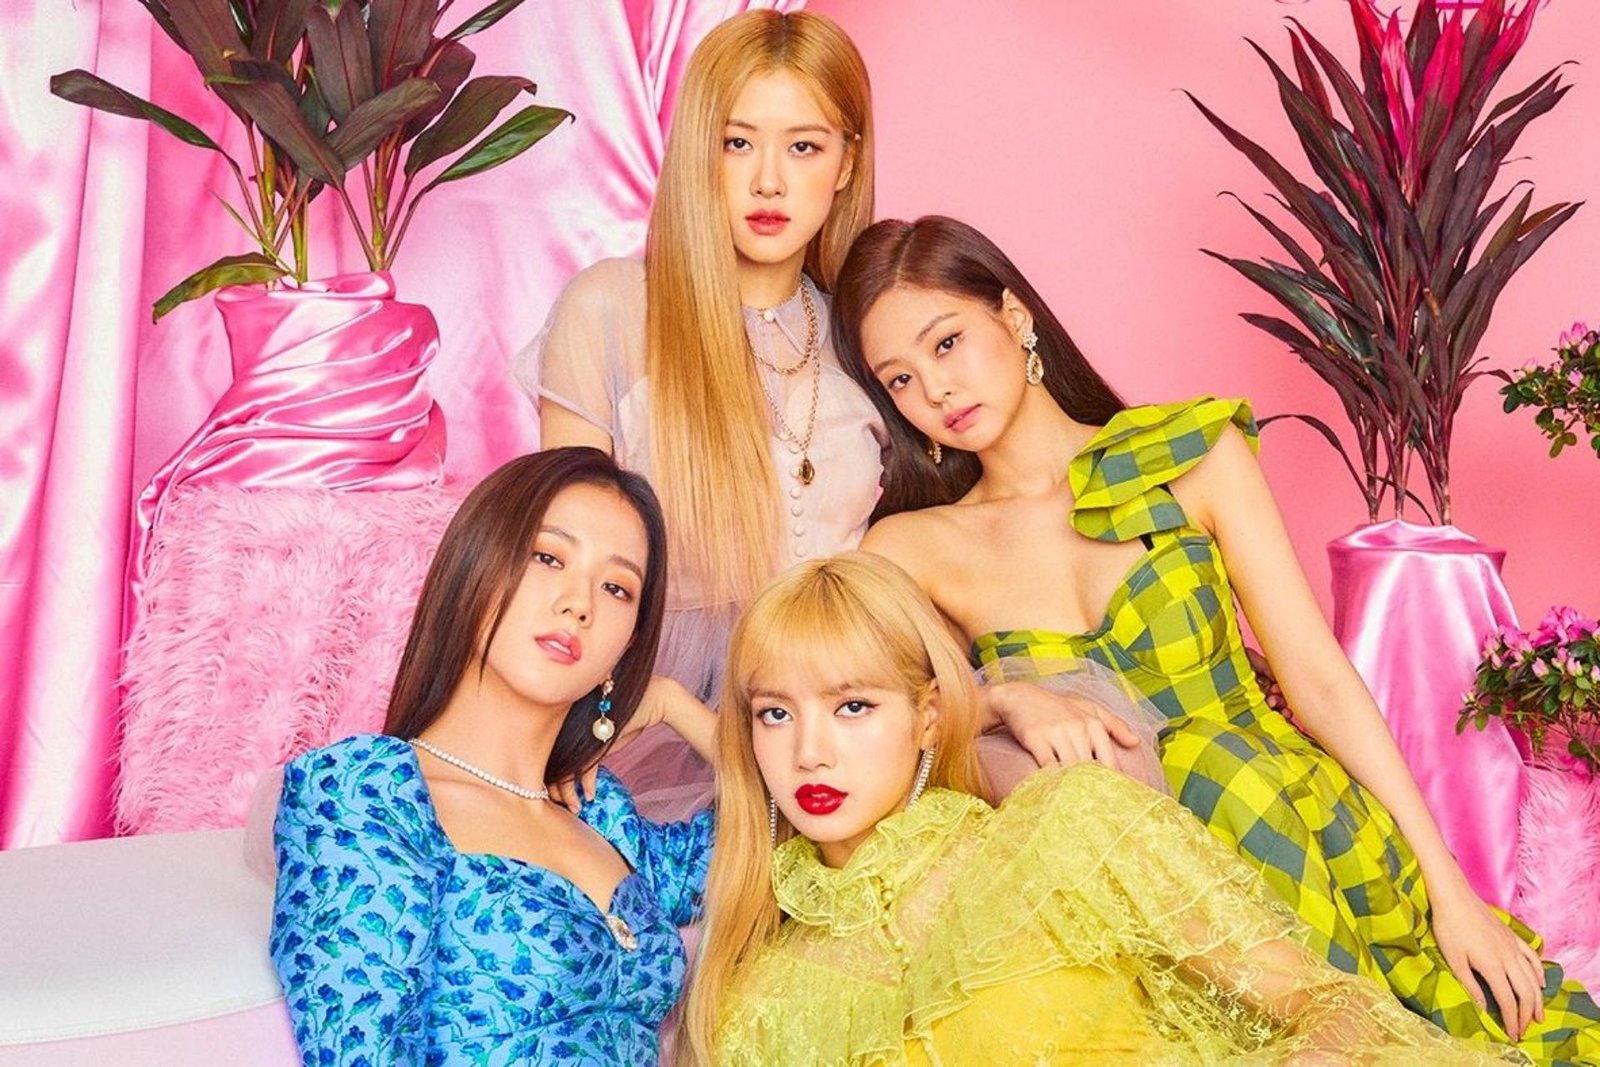 When 'BLACKPINK- Light Up the Sky' is launched on the OTT platform, 'THE MOVIE' will be launched in 100 countries for a worldwide massive release.